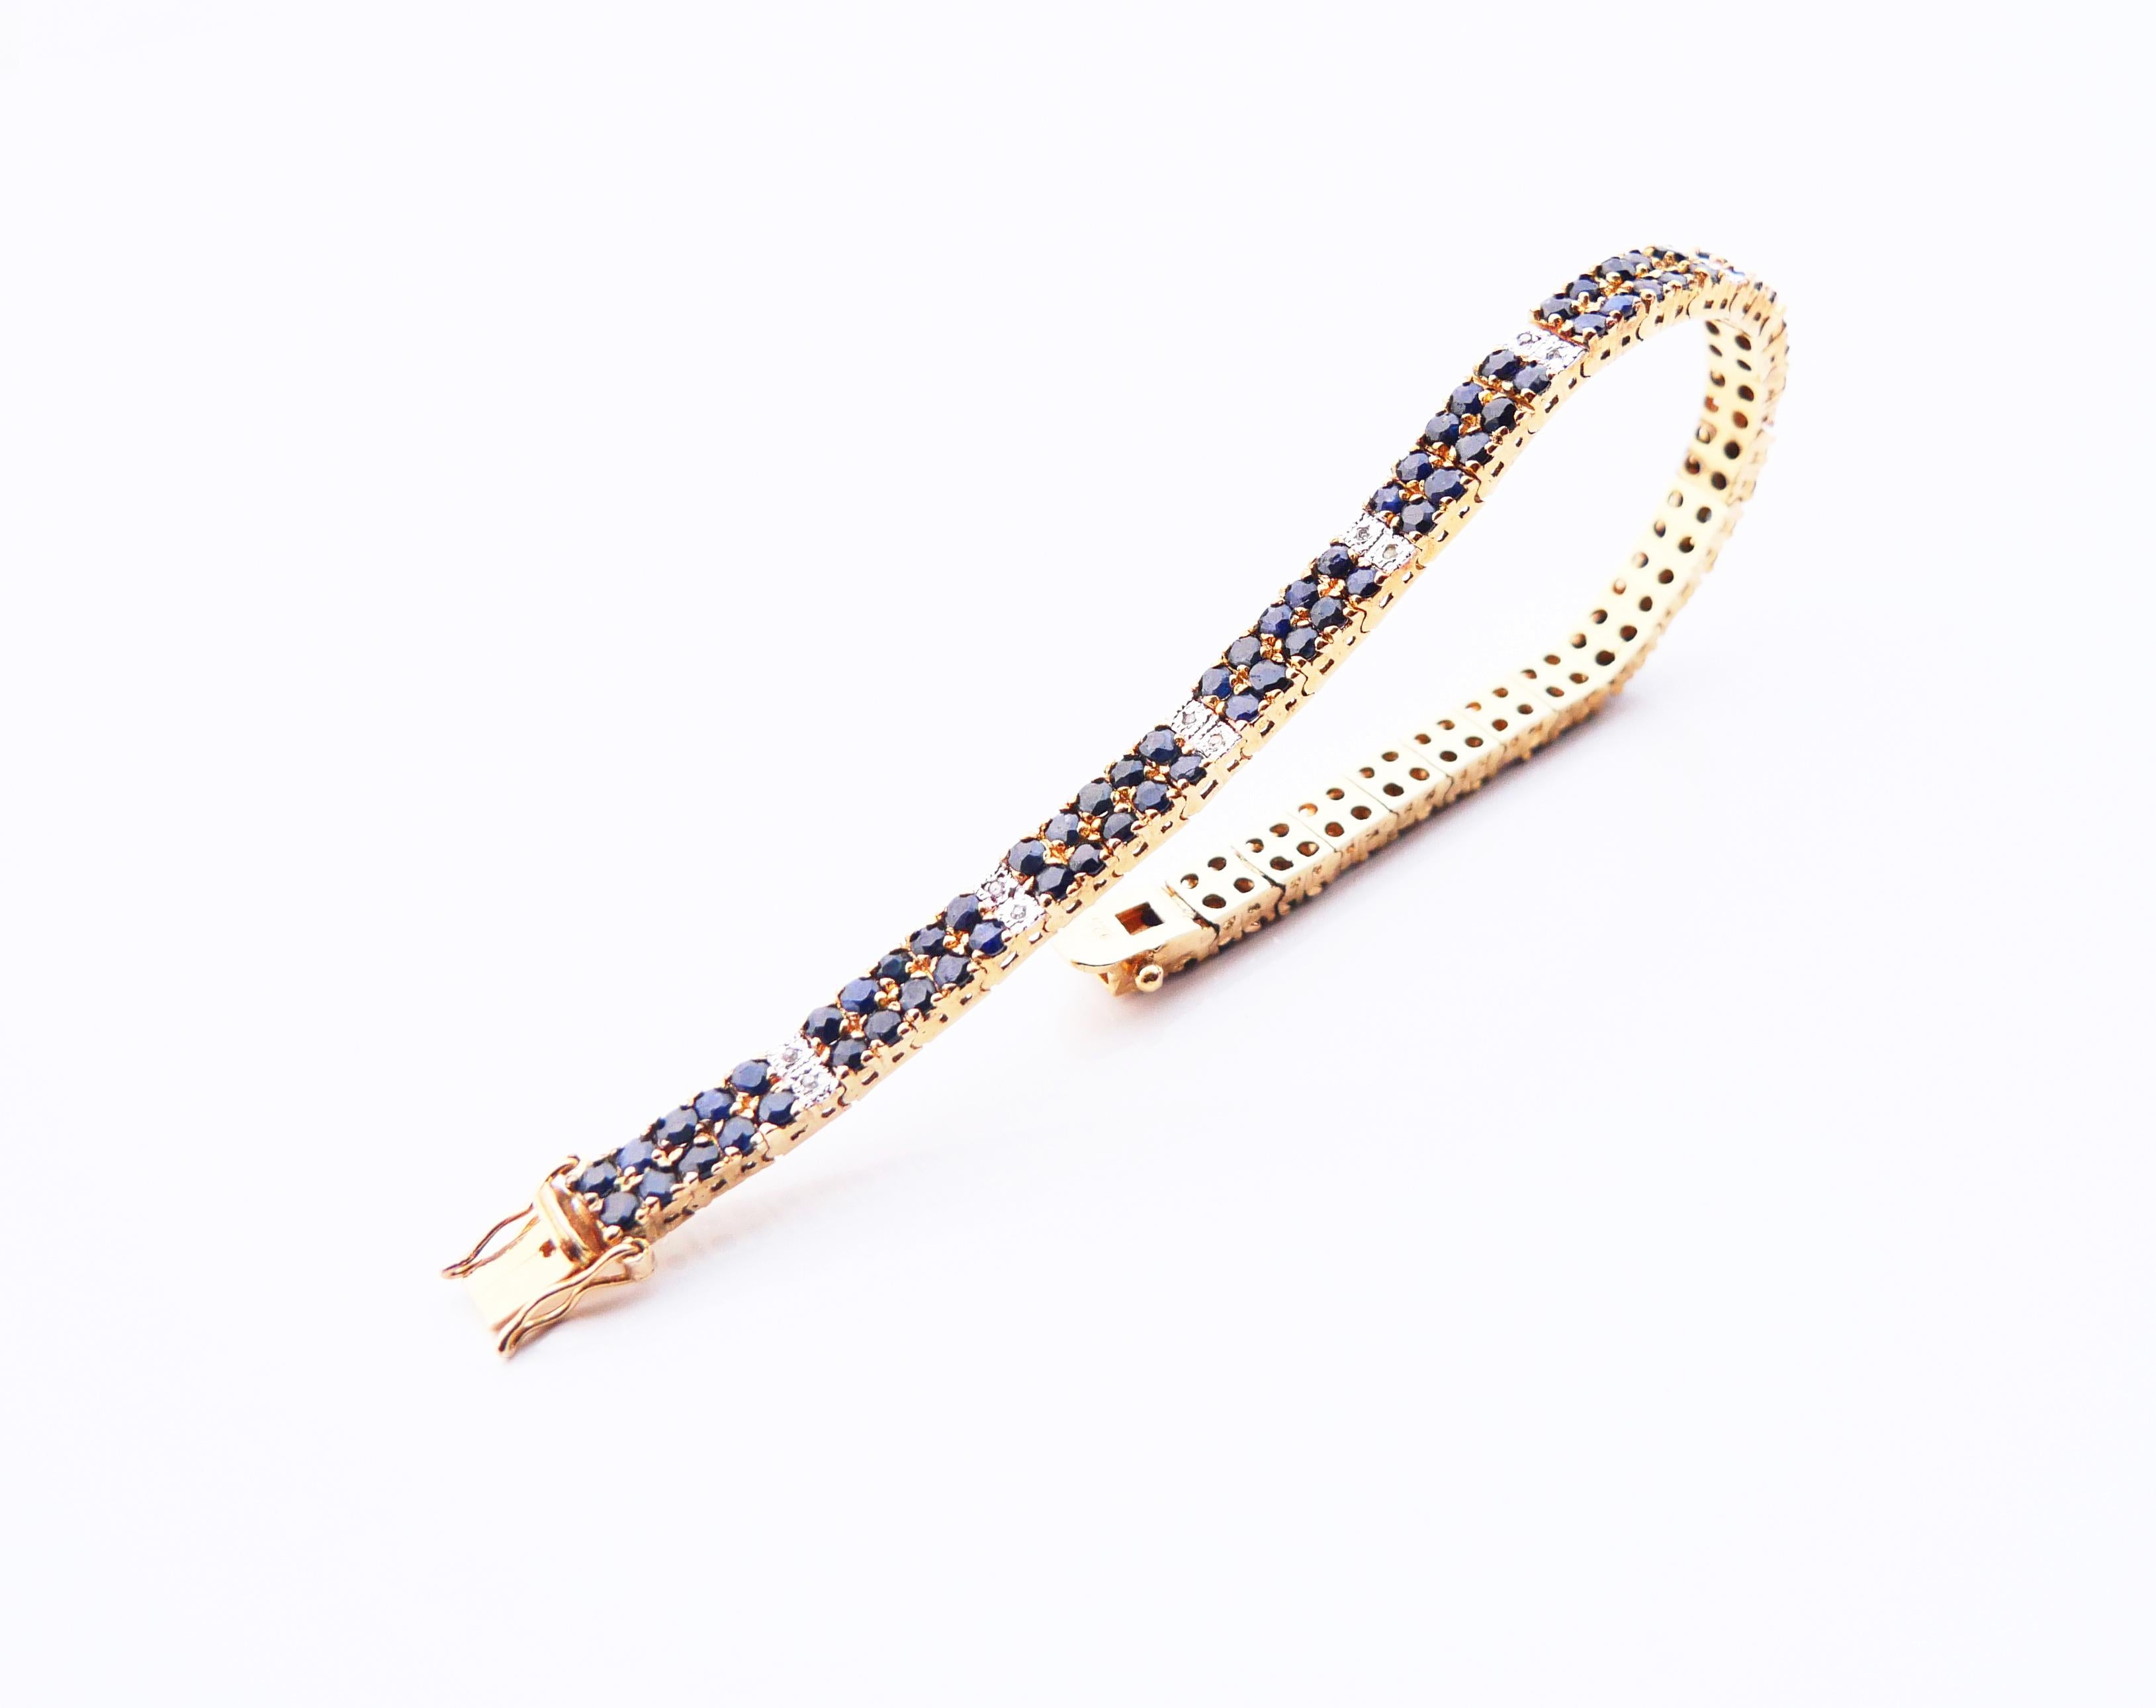 Flexible bracelet in solid 925 Silver /Gold plated or Gold filled featuring 110 diamonds cut natural Blue Sapphires and 22 diamond cut Diamonds.
Each Sapphire stone is Ø 2.5 mm /0.08ct, stones show internal inclusions and green tint.Total weight of